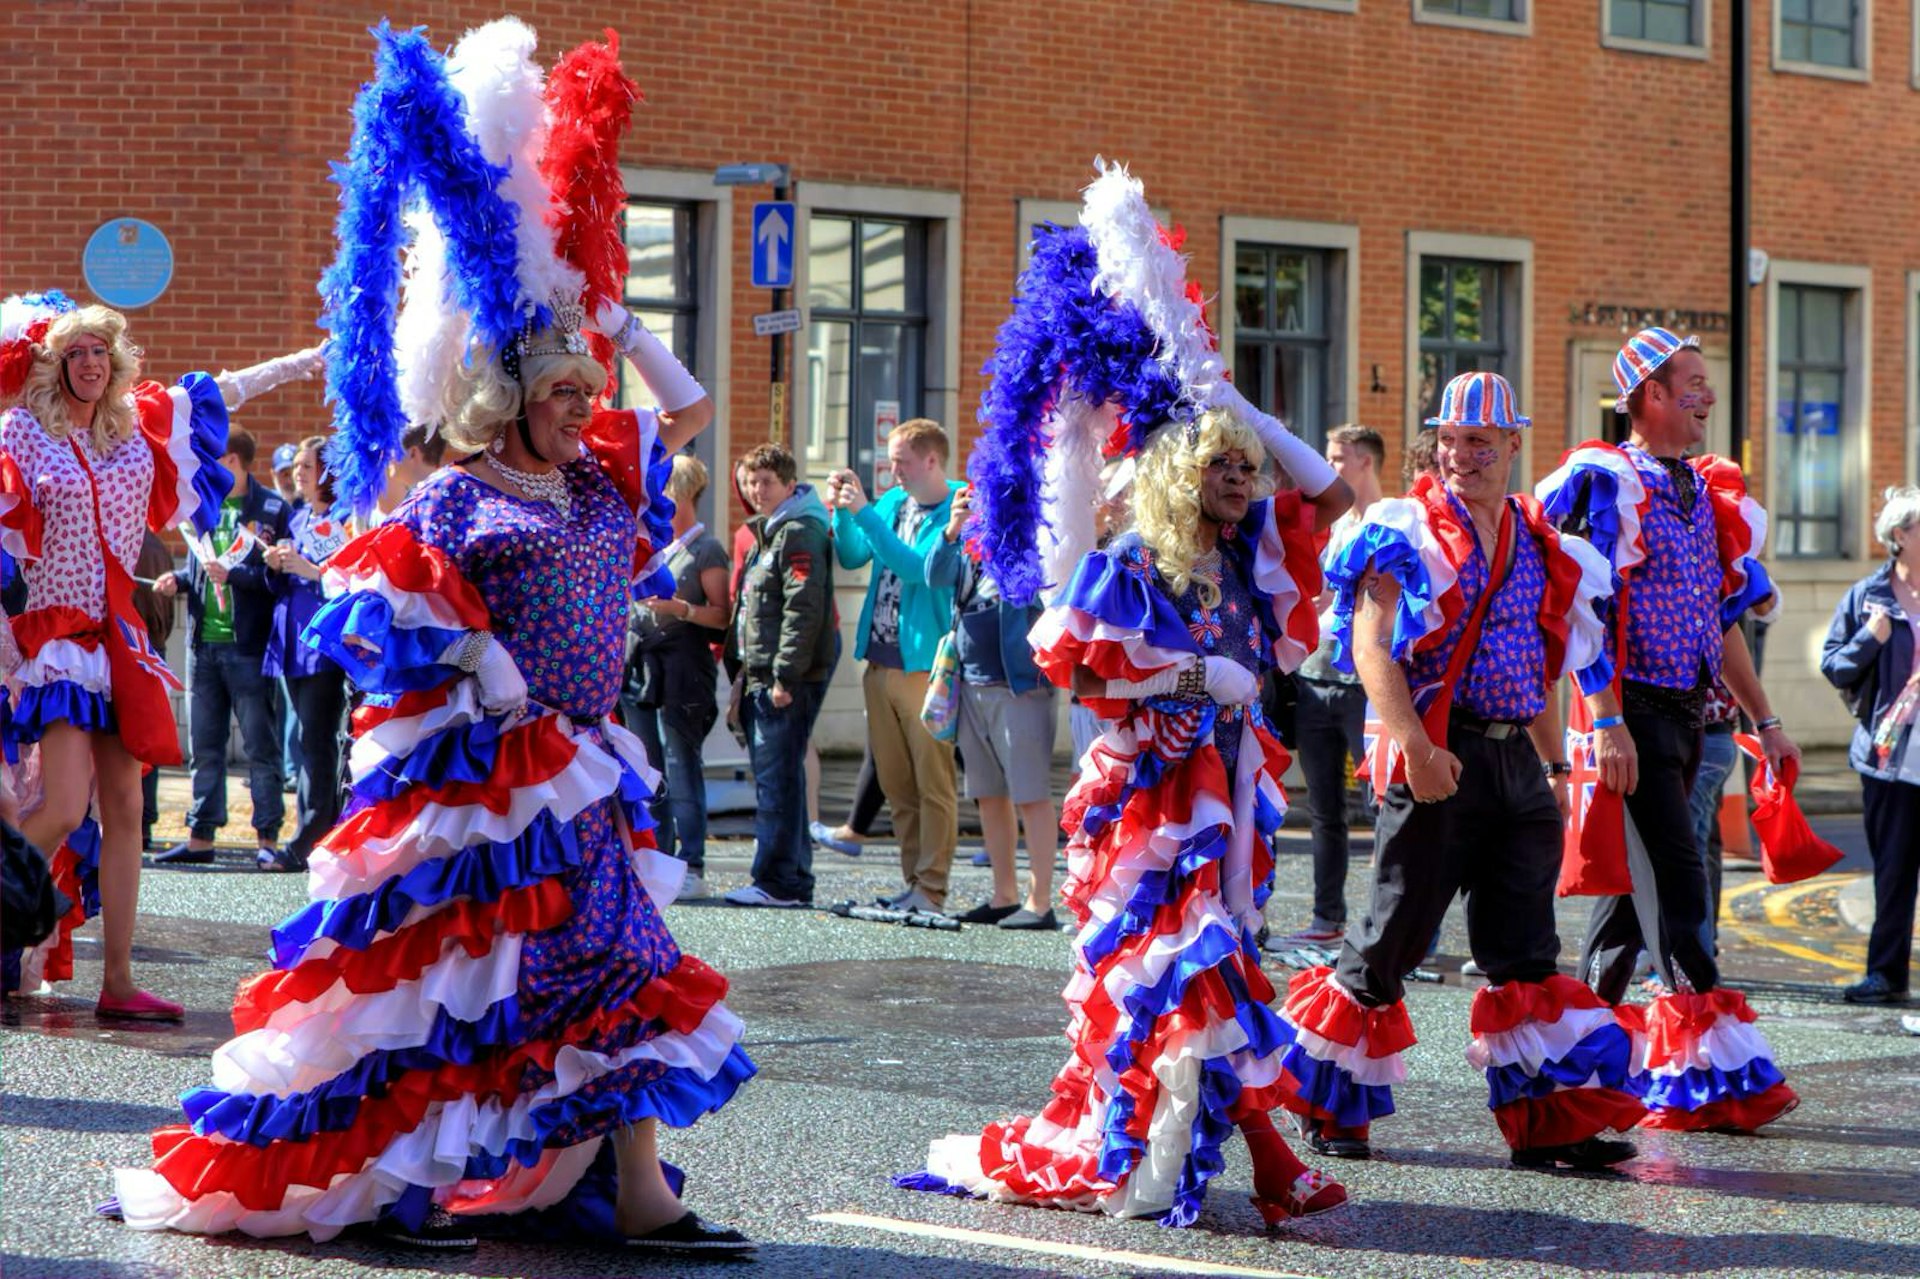 Parade participants in red, white and blue costumes at Manchester Pride in the UK